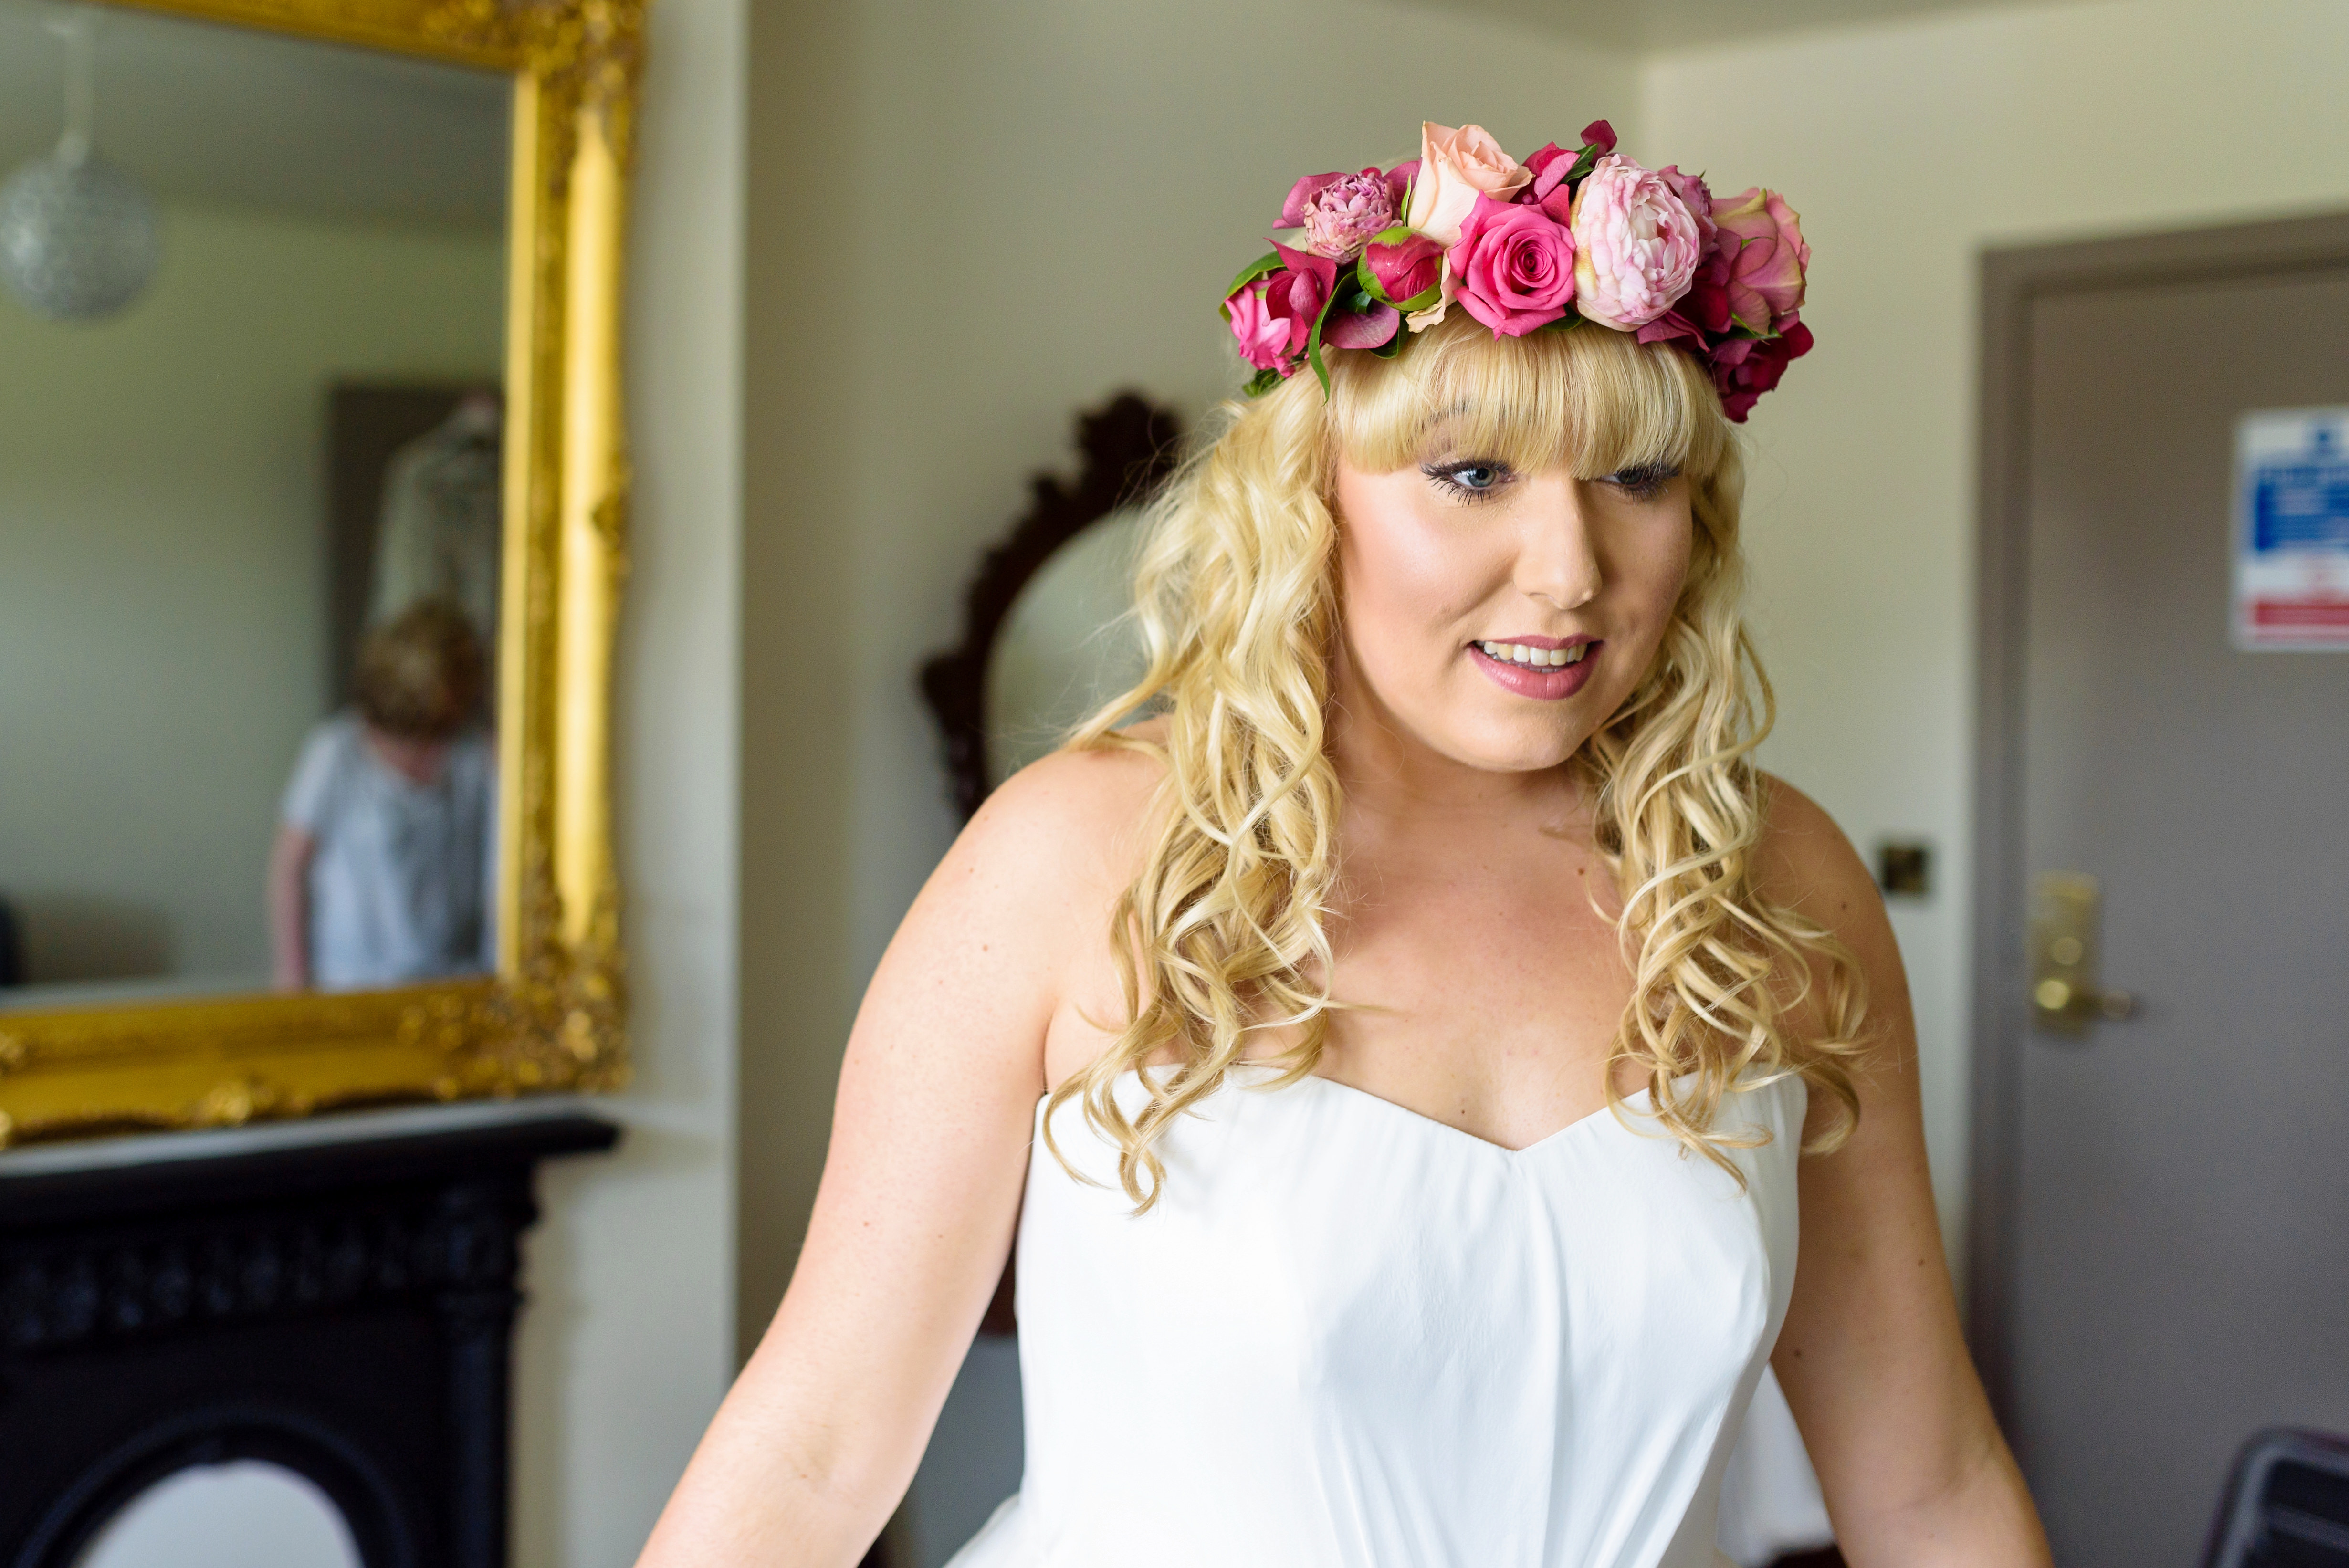 Southdowns Manor Wedding